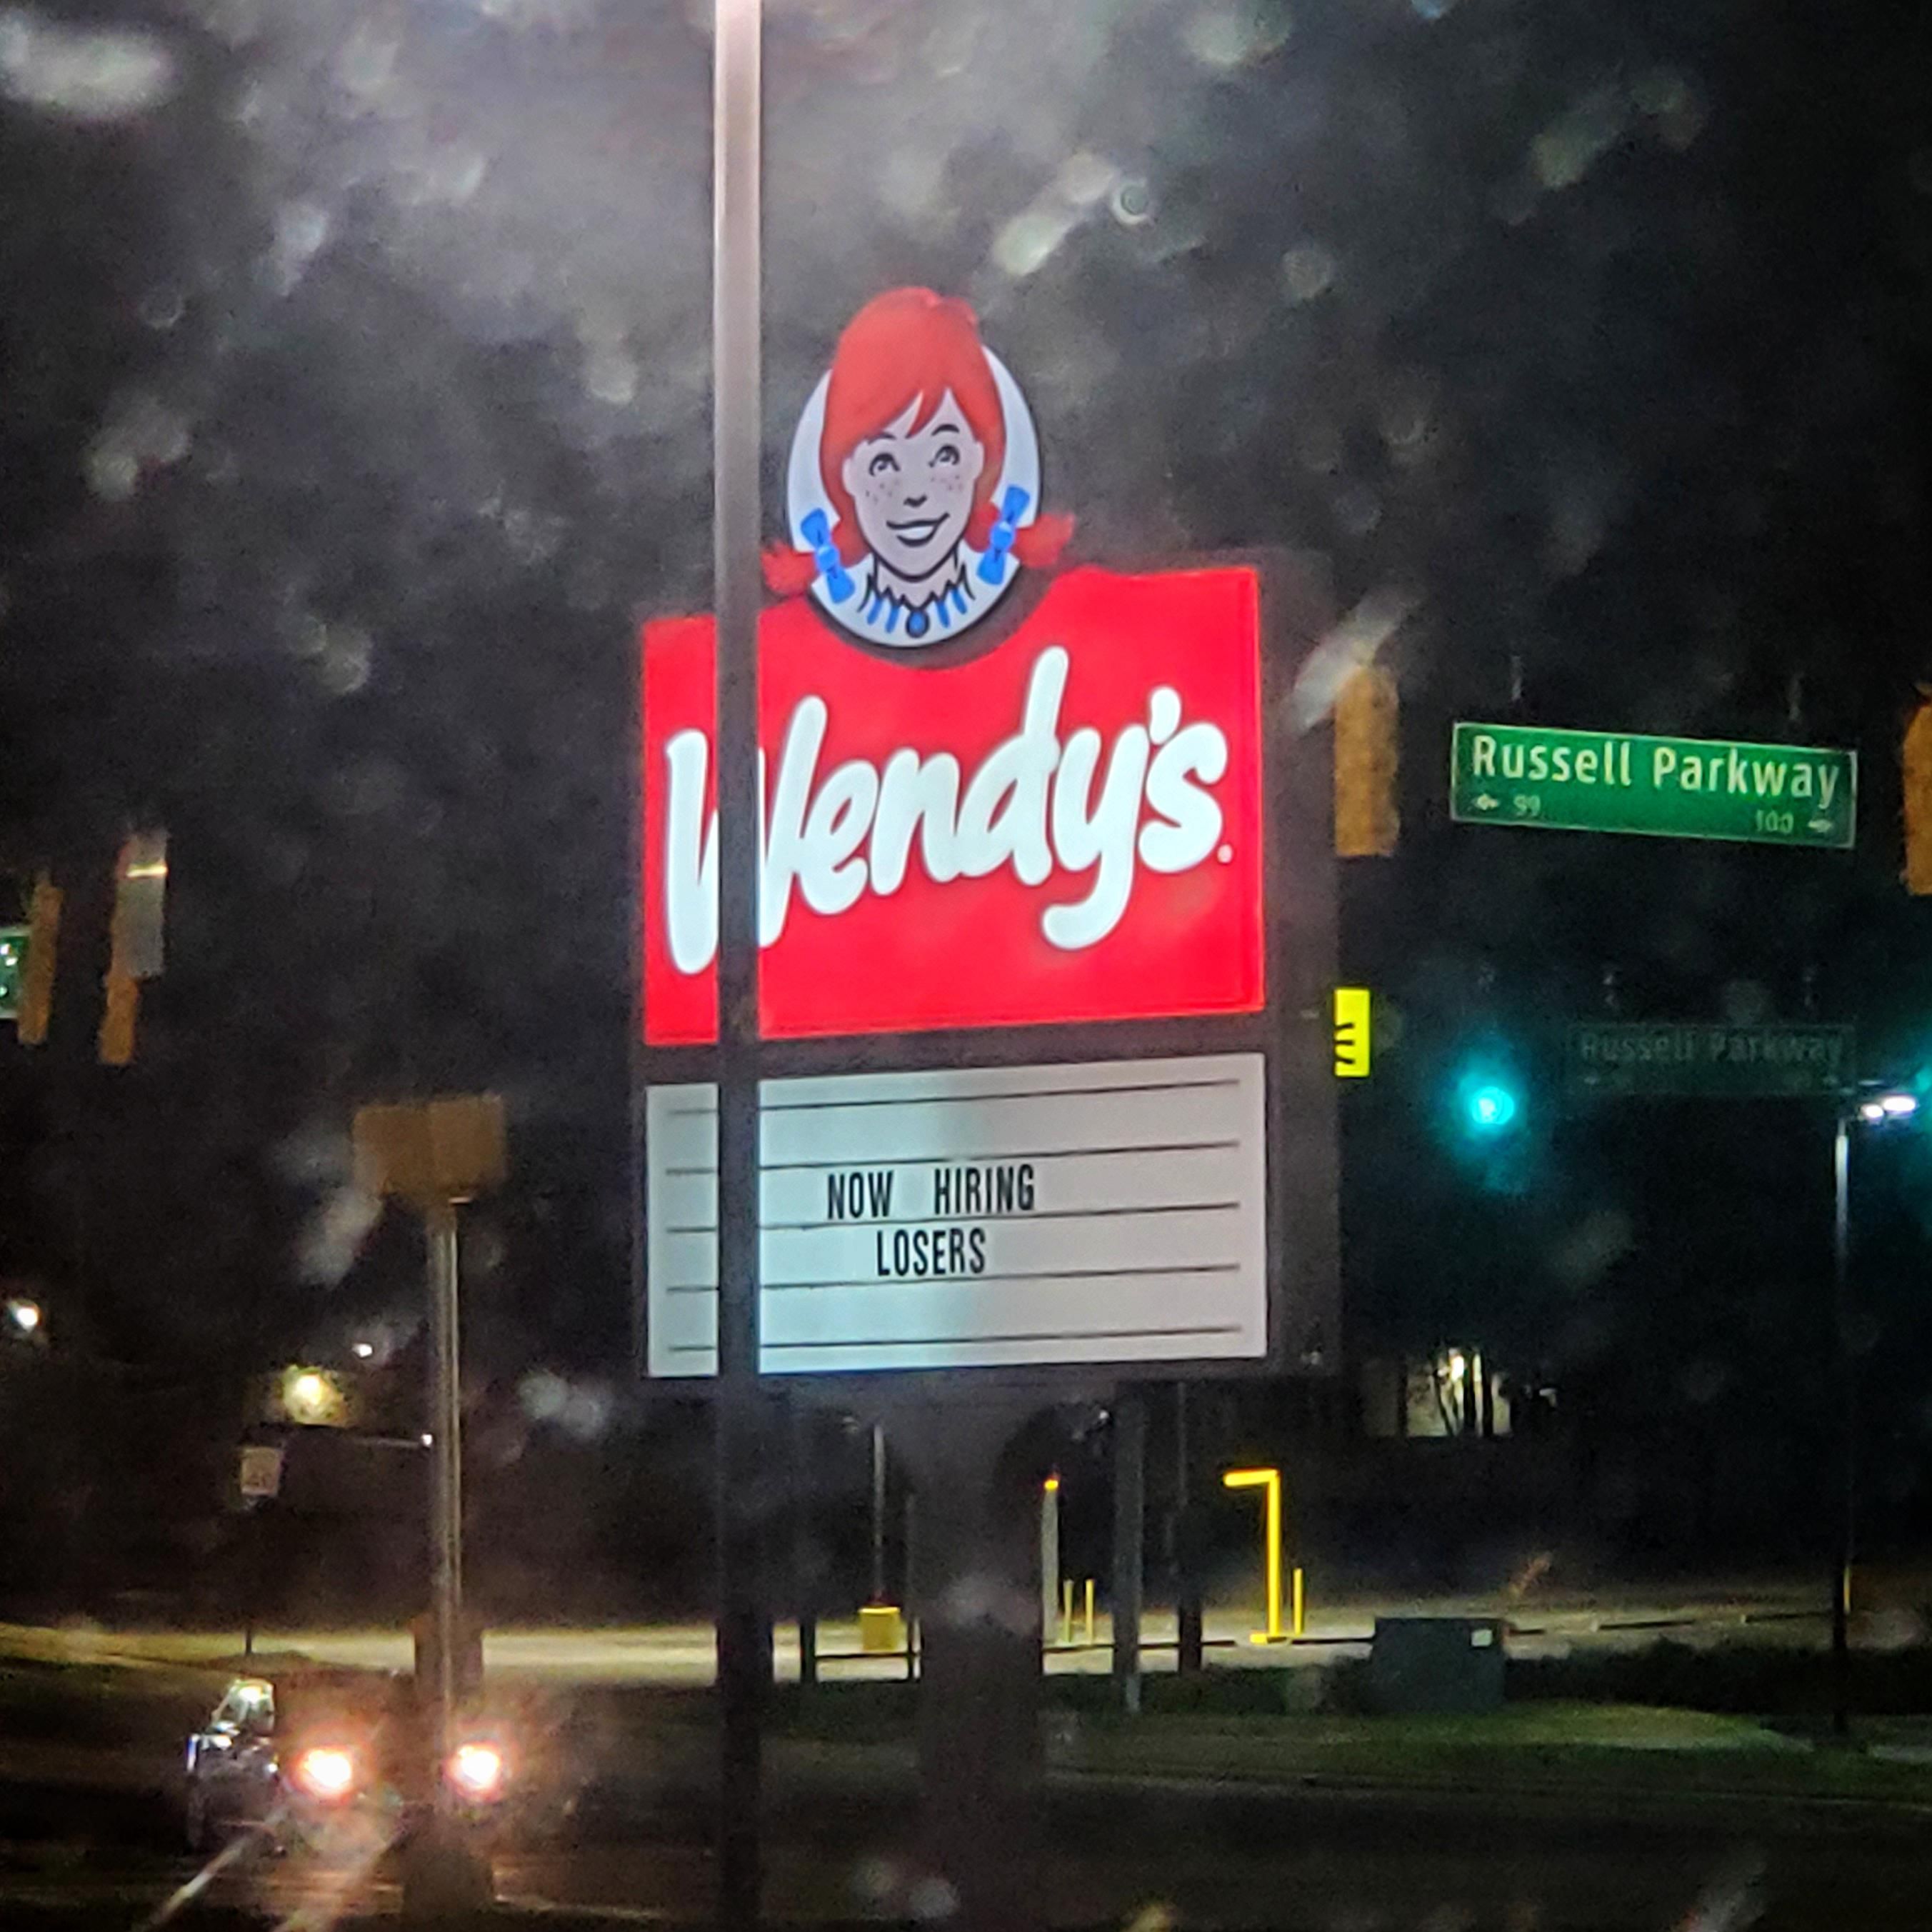 Ah yes, Wendy's, where we value our employees.